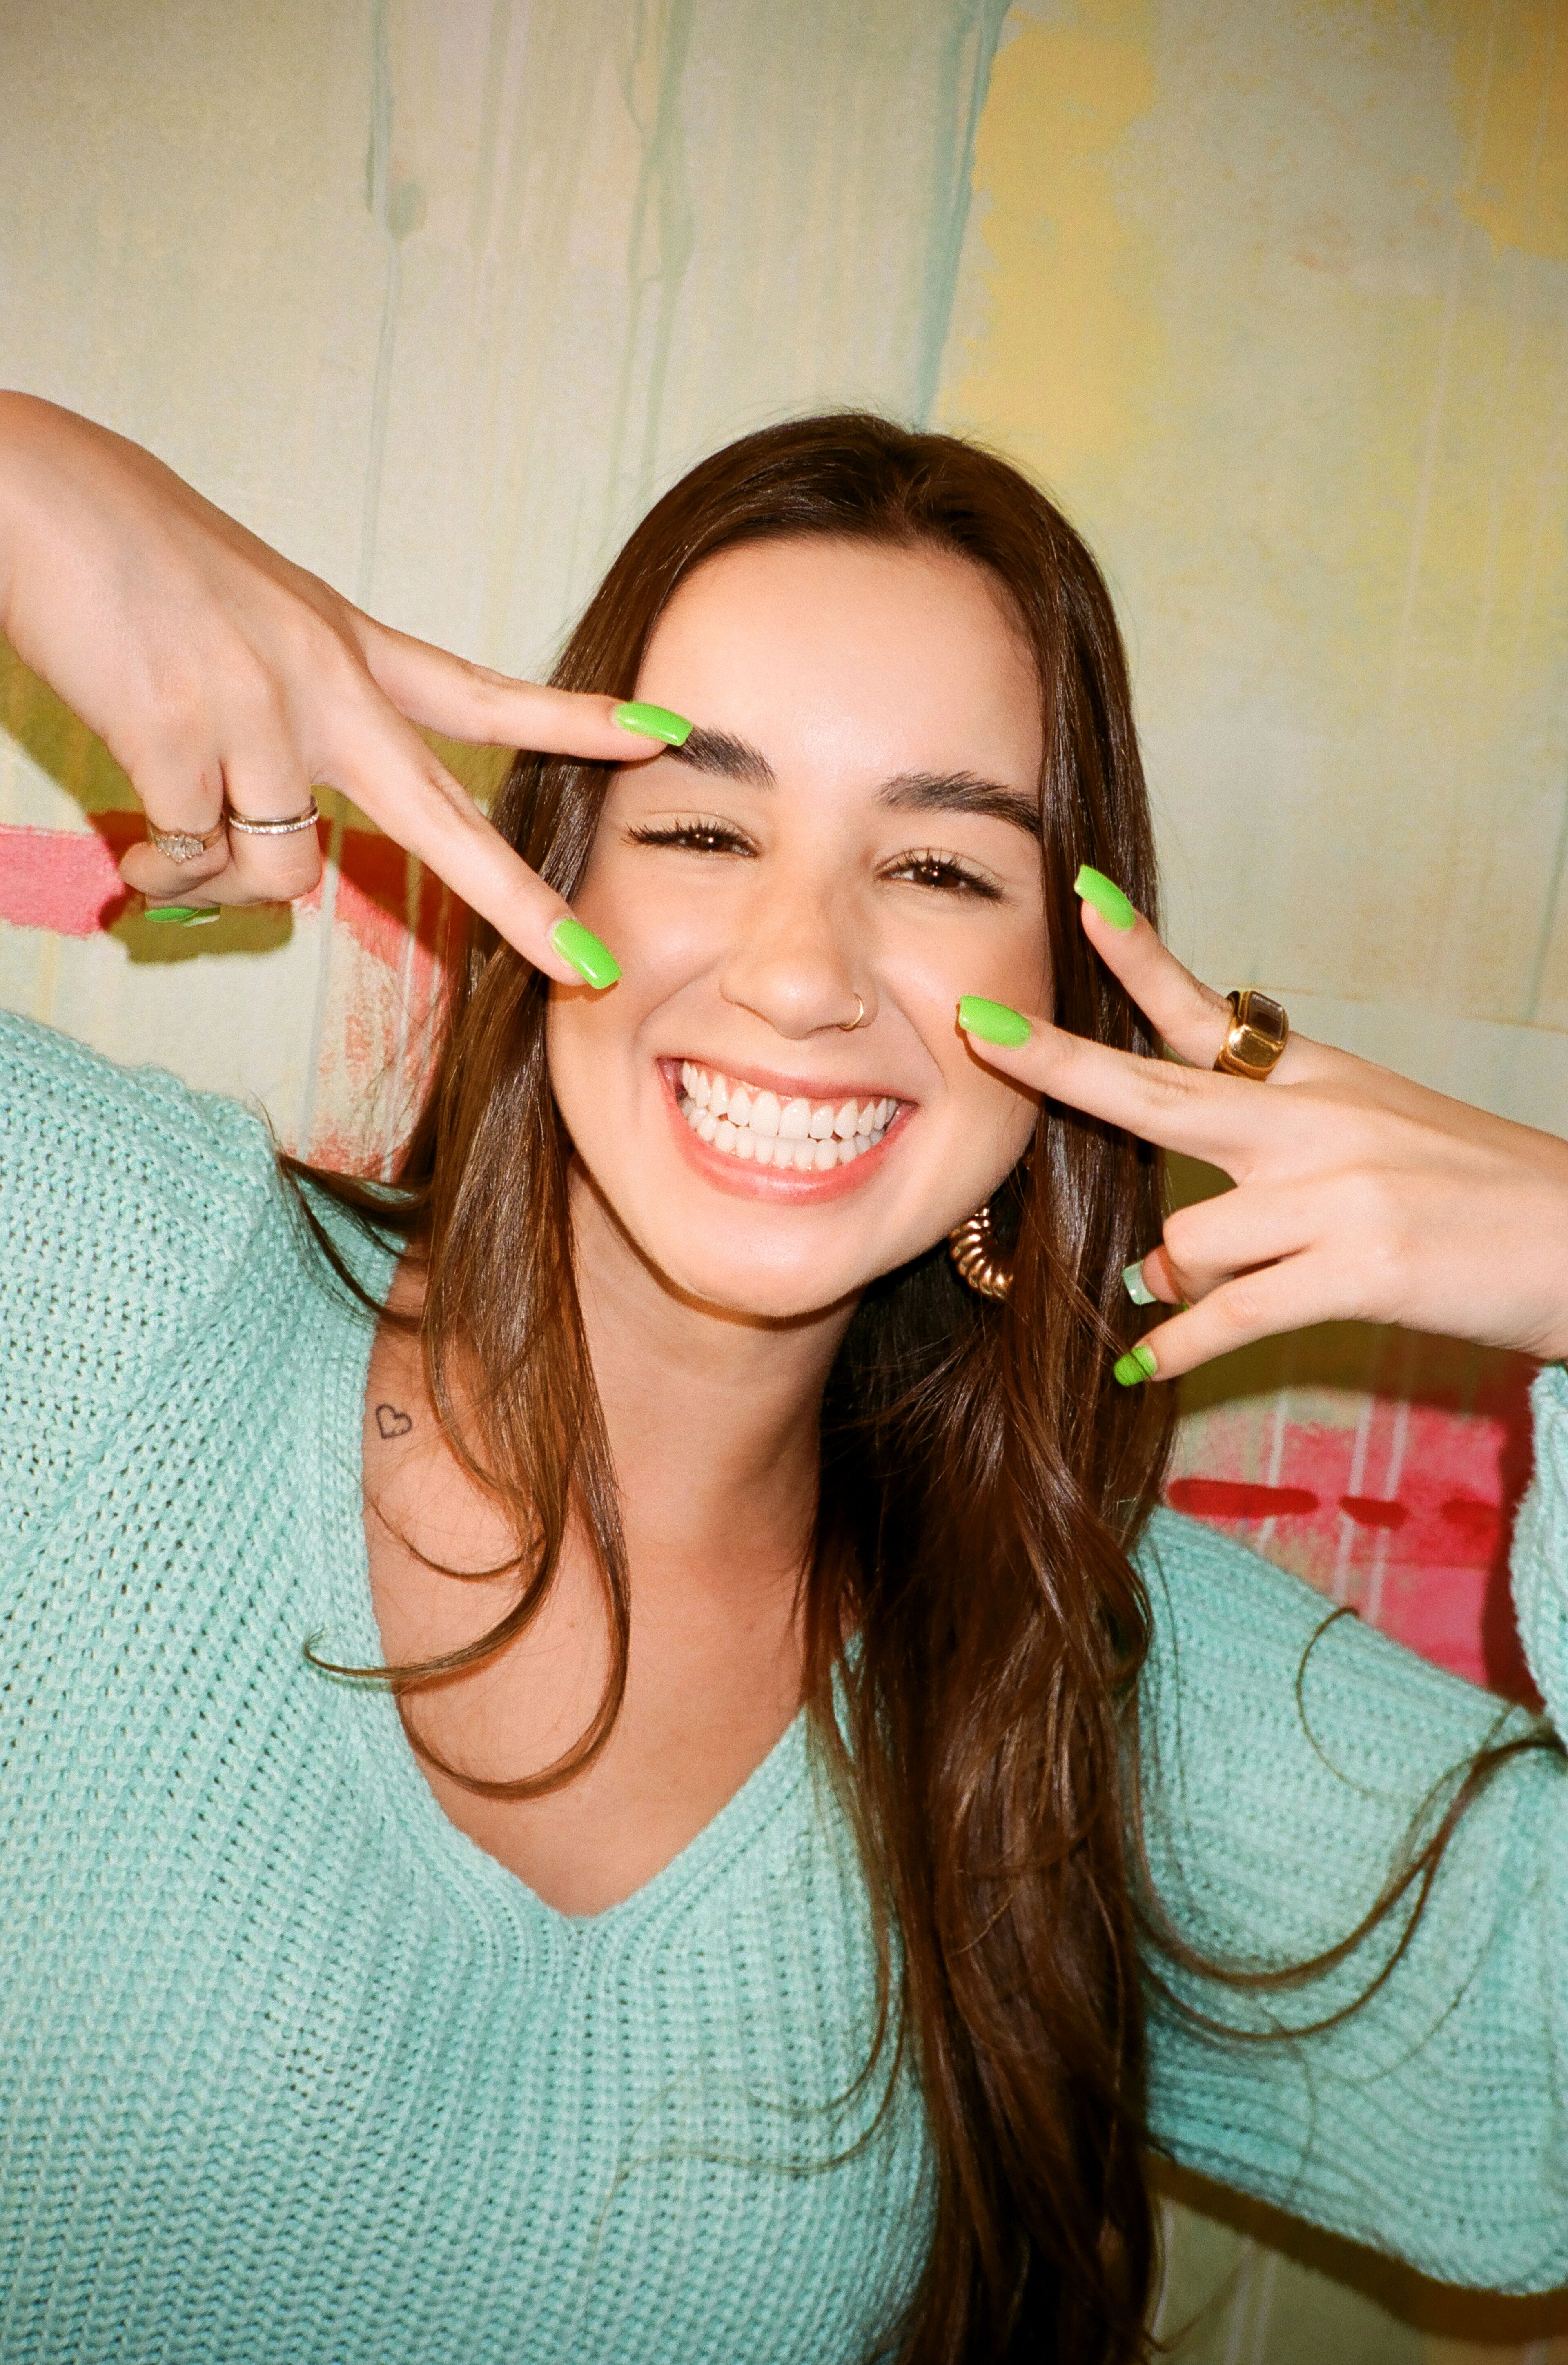 A smiling woman with long brown hair poses playfully, flashing the peace sign near her face, with bright green nail polish, against a softly blurred artistic background.